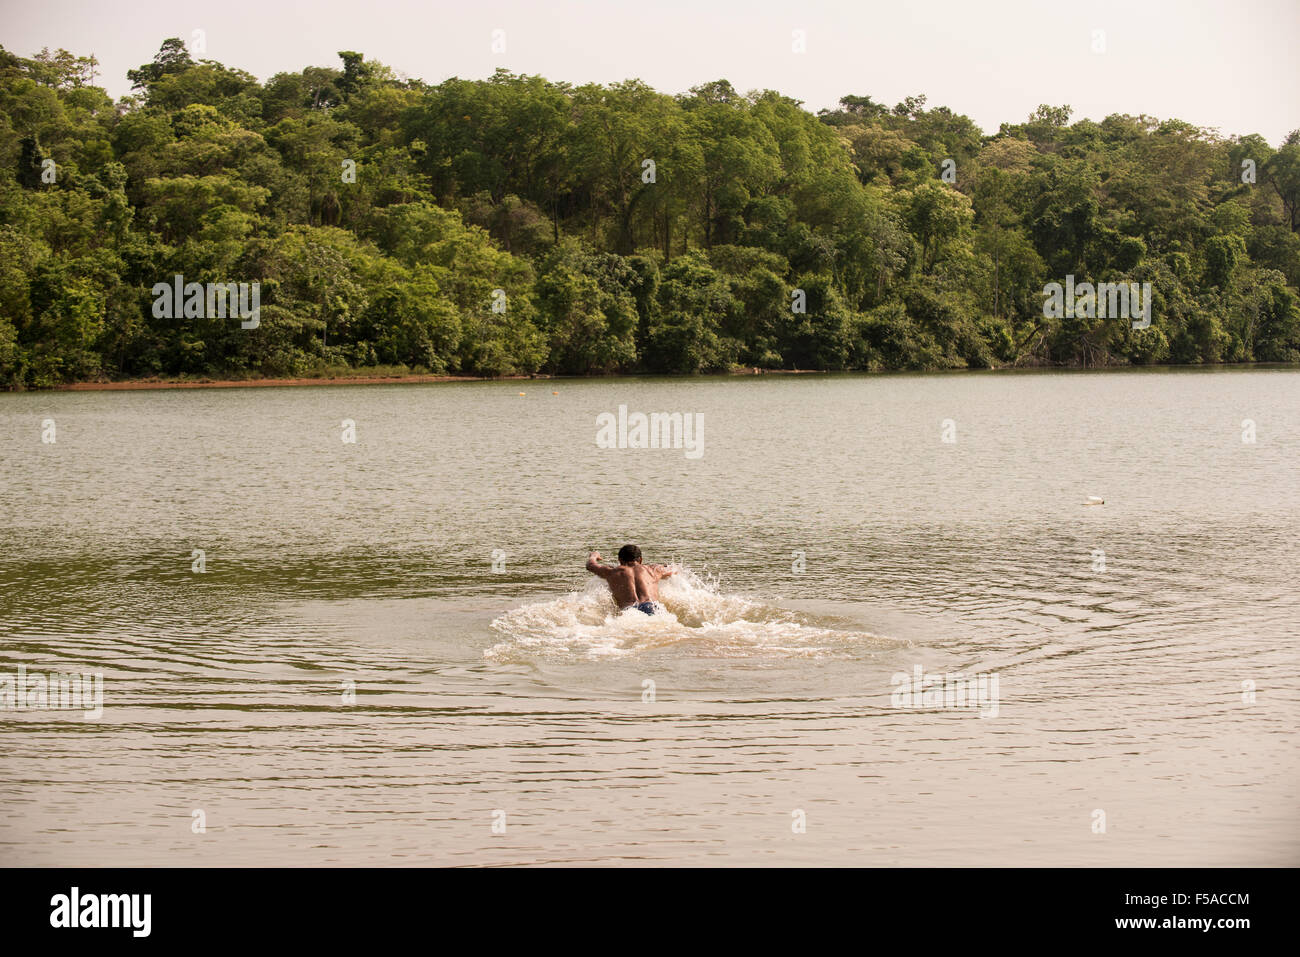 Palmas, Tocantins State, Brazil. 29th October, 2015. A competitor takes a warm-up swim before the men's swimming race at the International Indigenous Games, in the city of Palmas, Tocantins State, Brazil. Credit:  Sue Cunningham Photographic/Alamy Live News Stock Photo